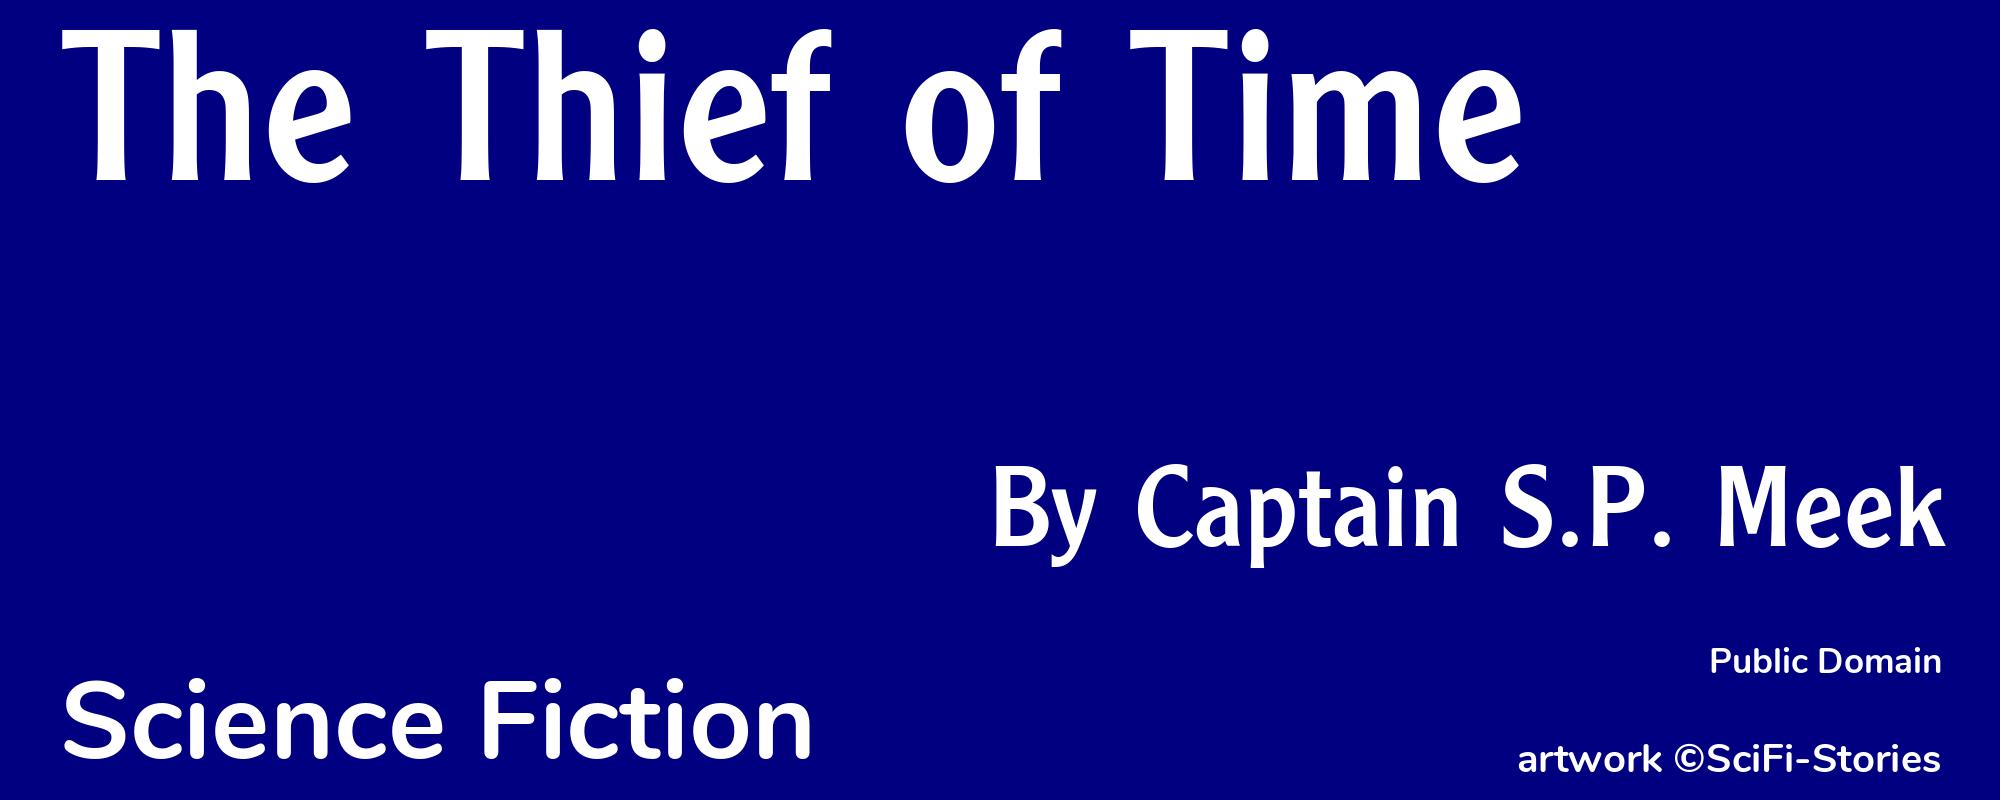 The Thief of Time - Cover